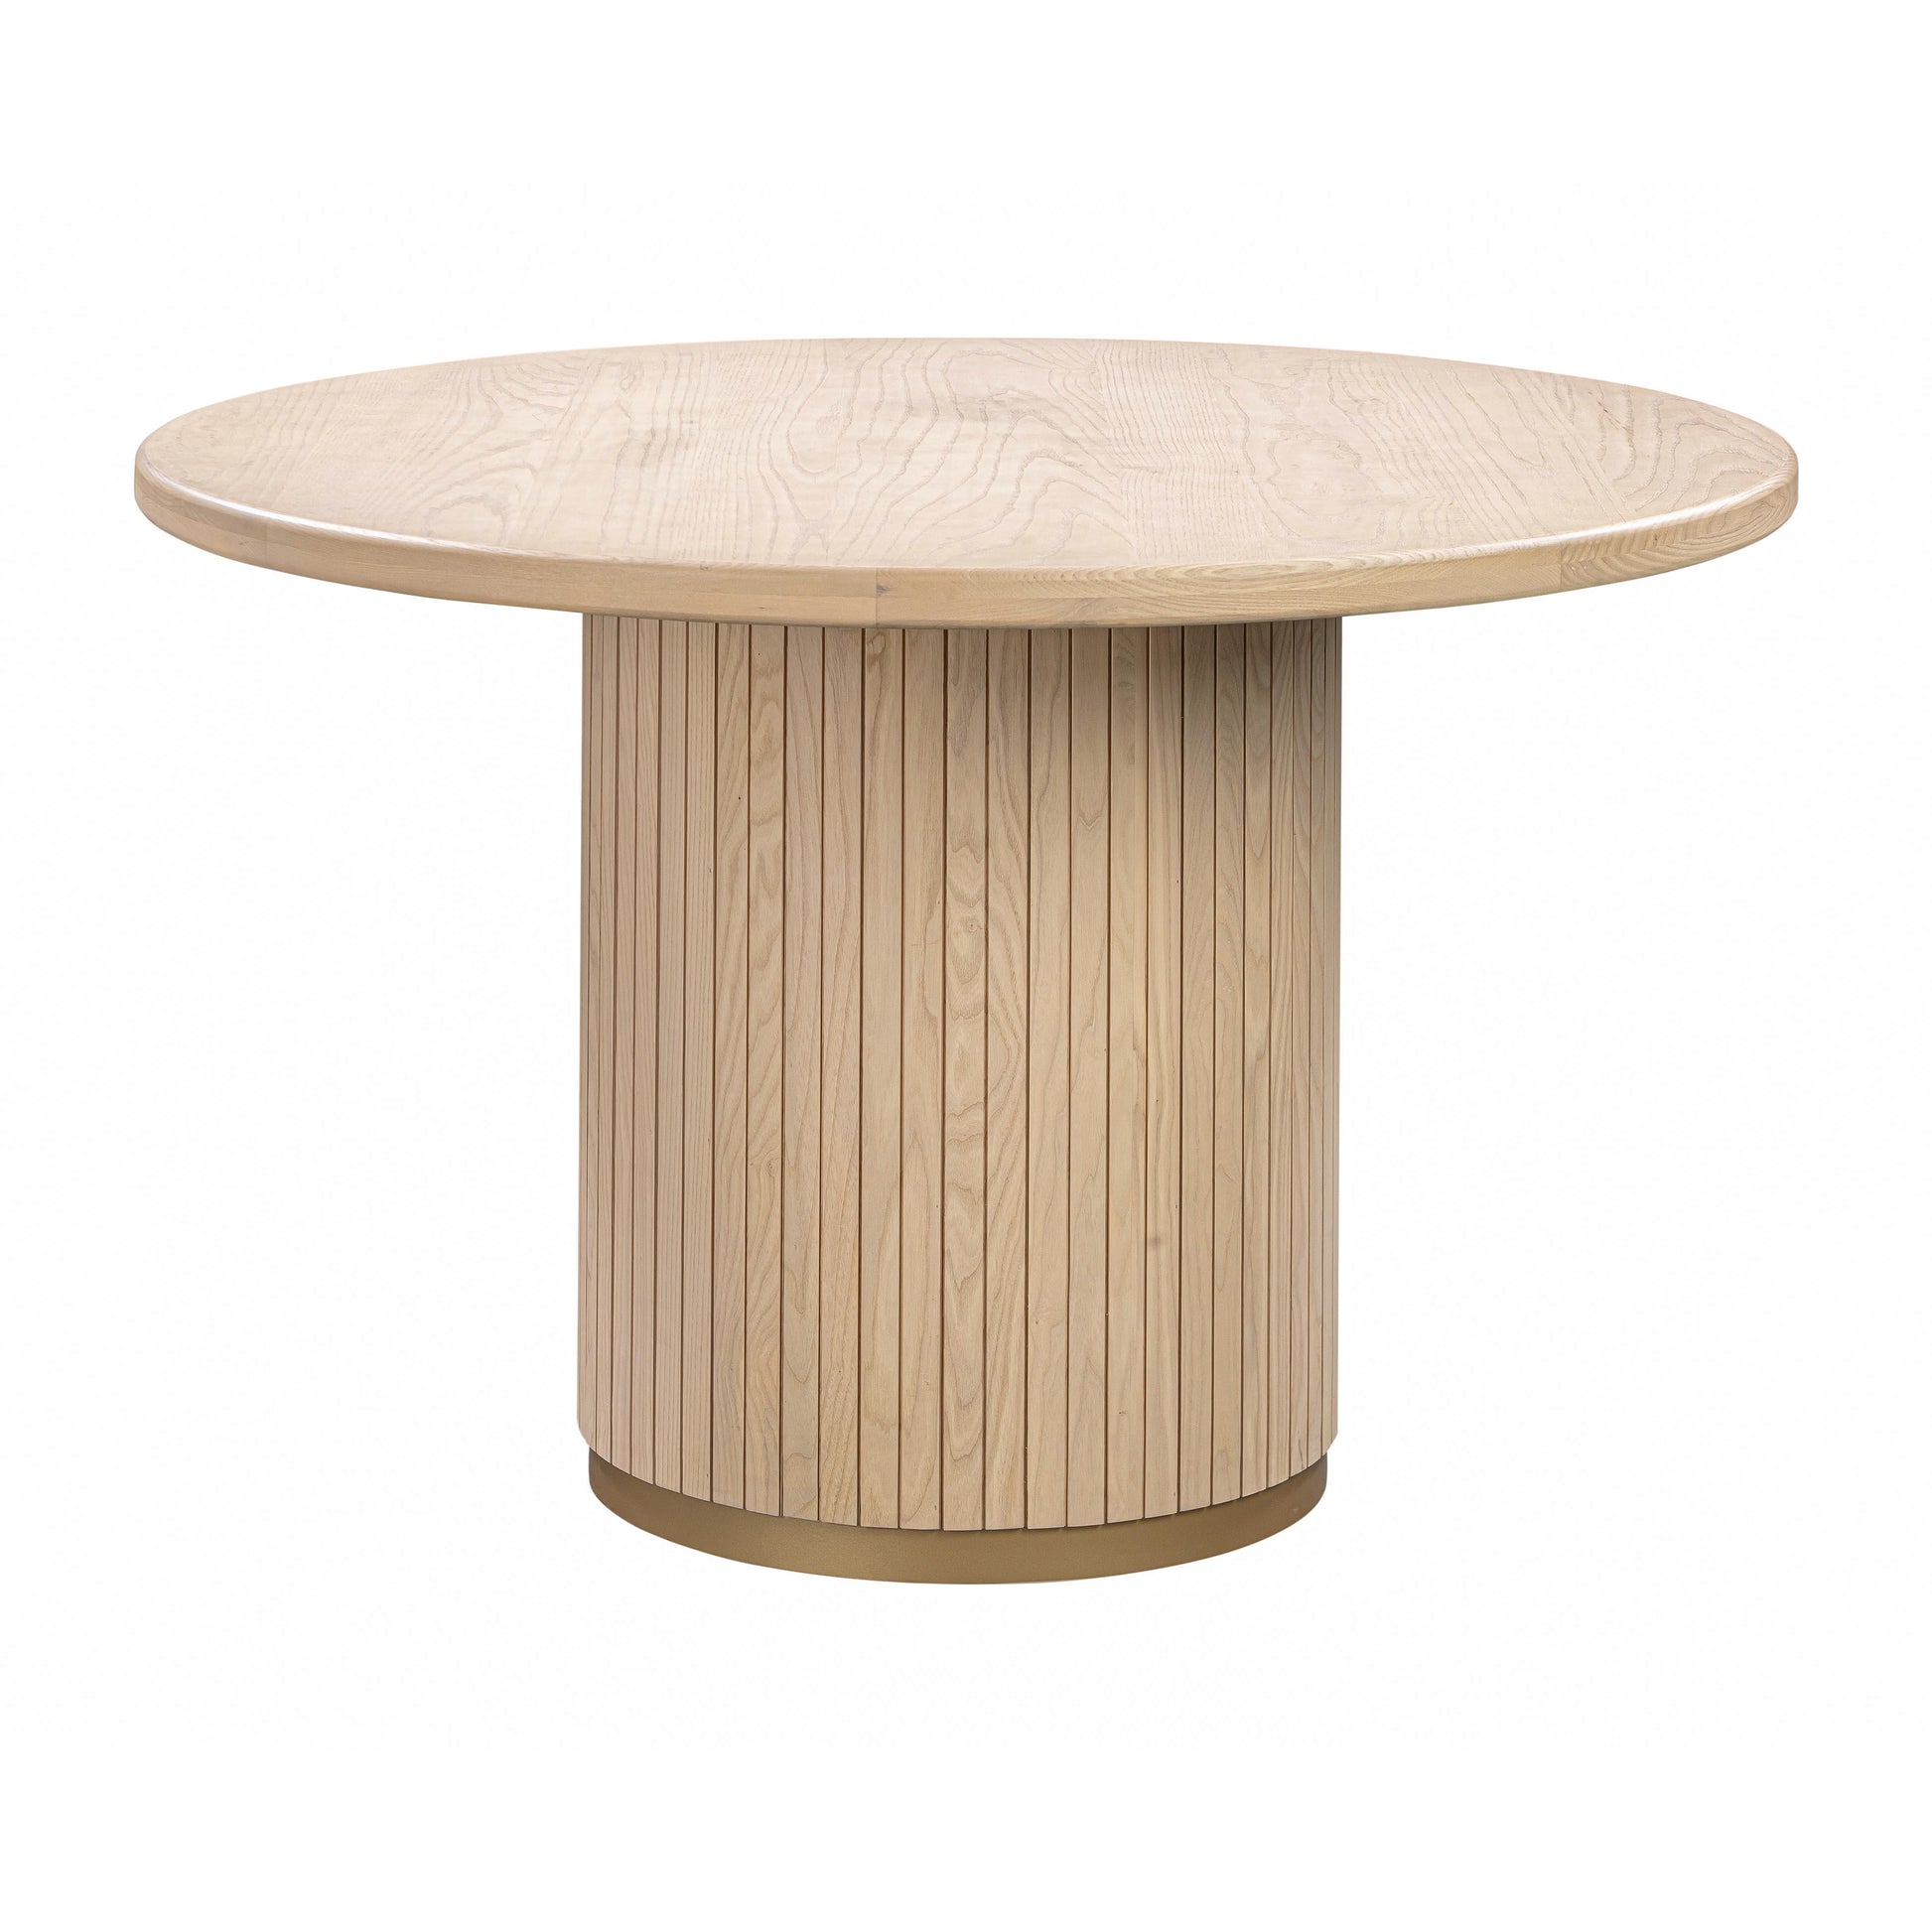 Tov Furniture Chelsea Ash Wood Round Dining Table